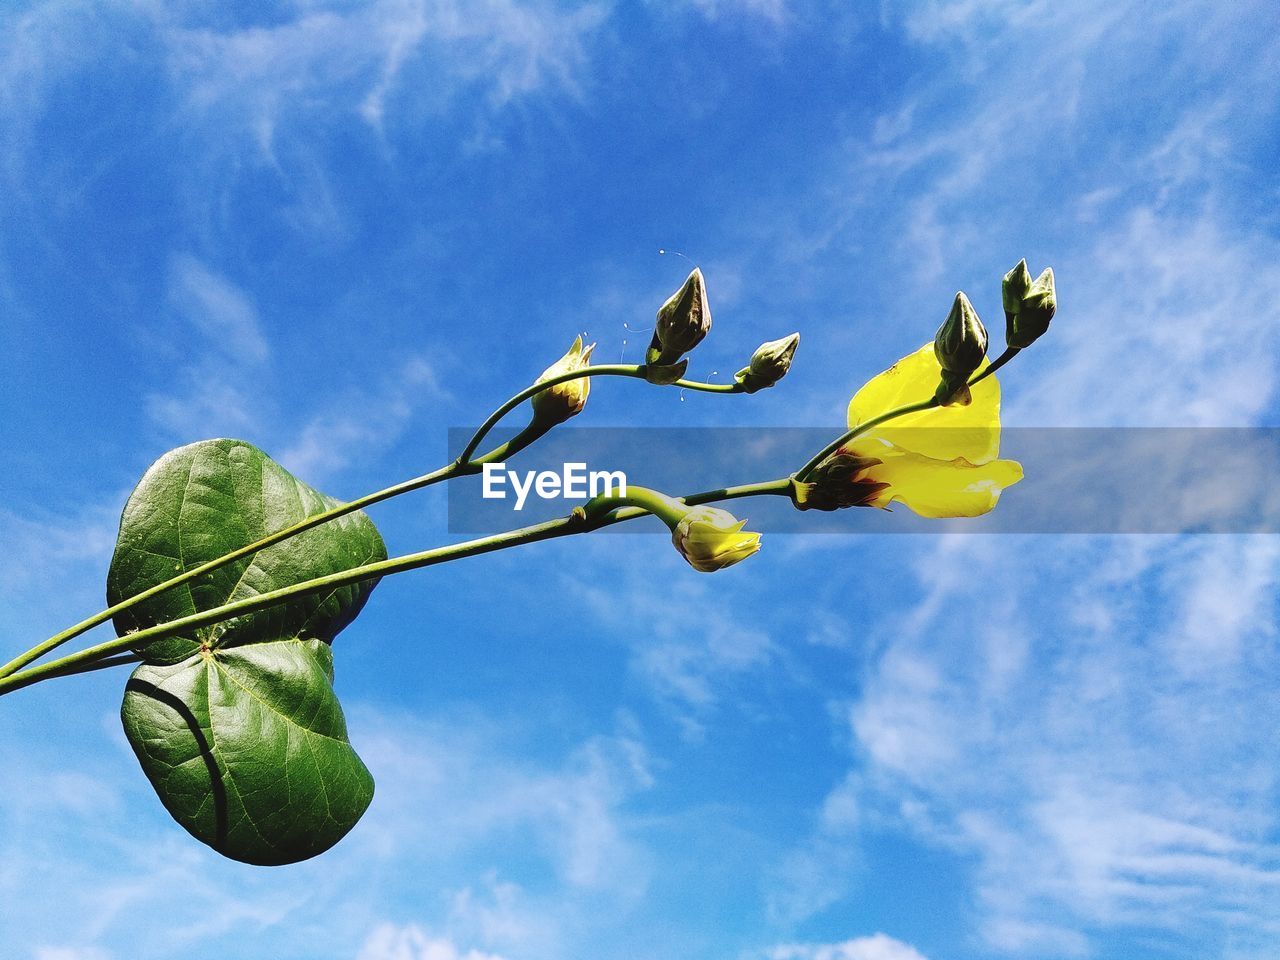 LOW ANGLE VIEW OF YELLOW FLOWERING PLANT AGAINST SKY